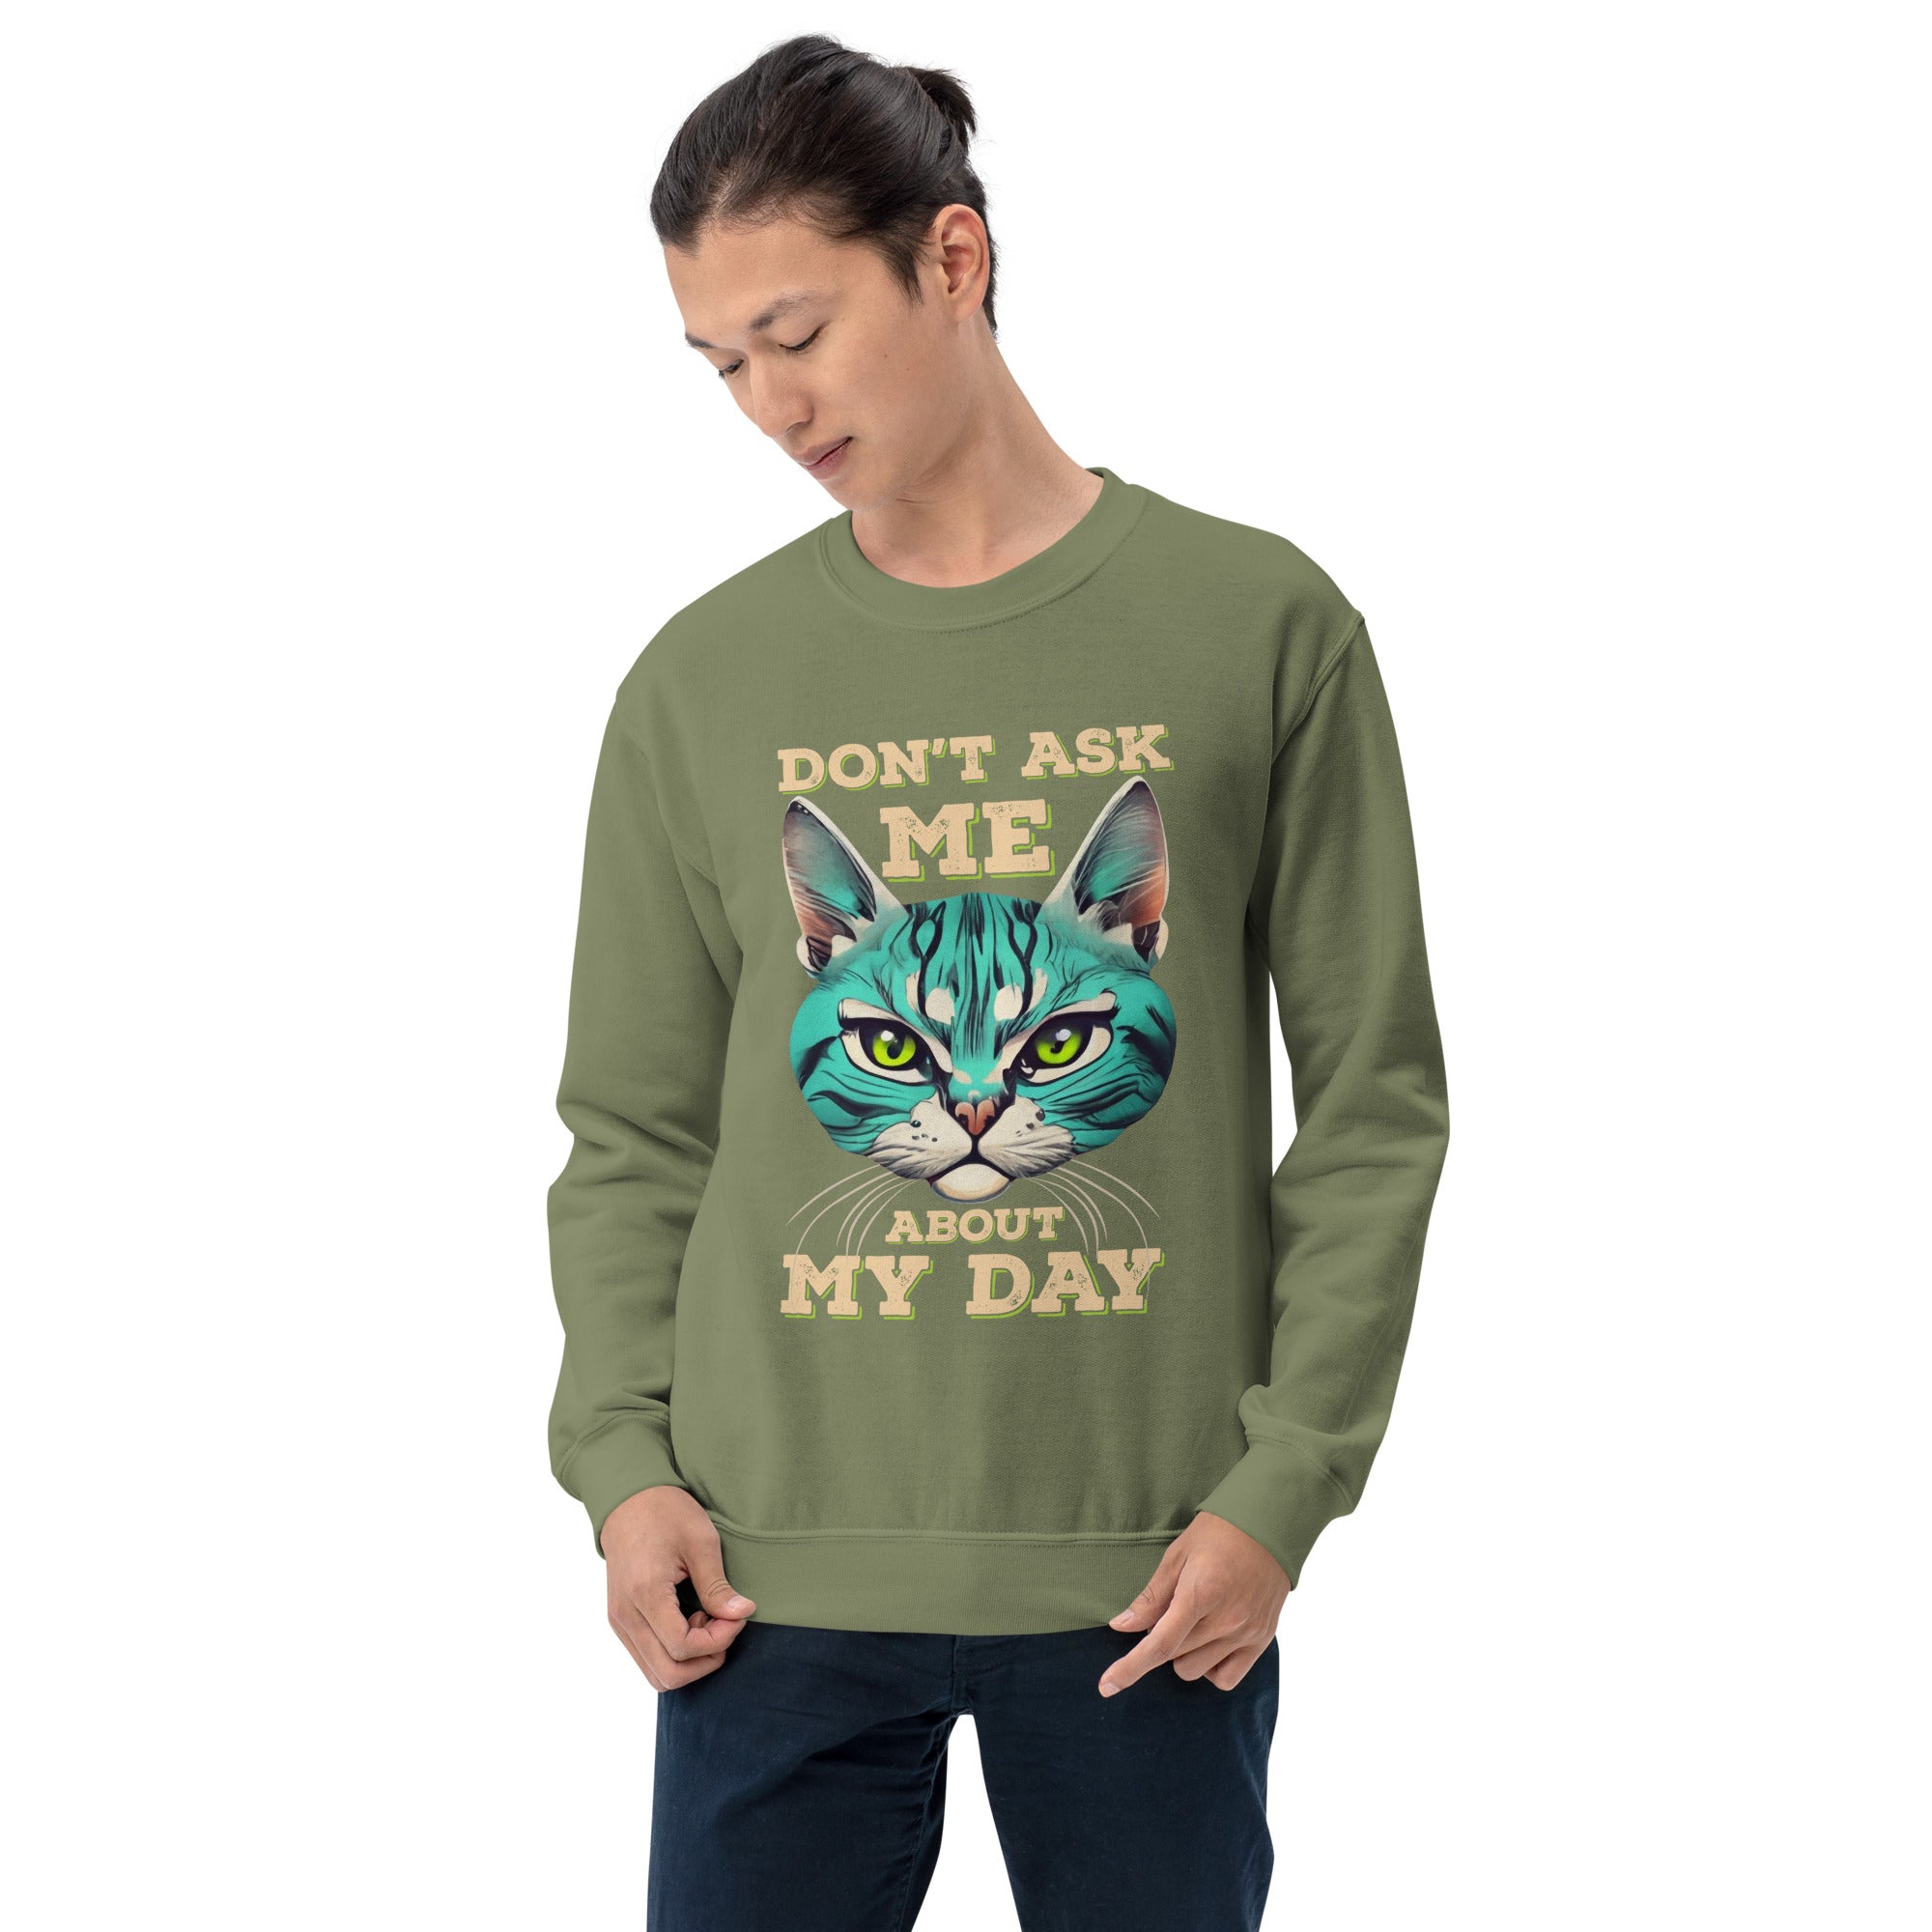 Don't Ask Me About My Day Funny Moody Cat Saying Pop Art Style Colorful Cat Men's Sweatshirt